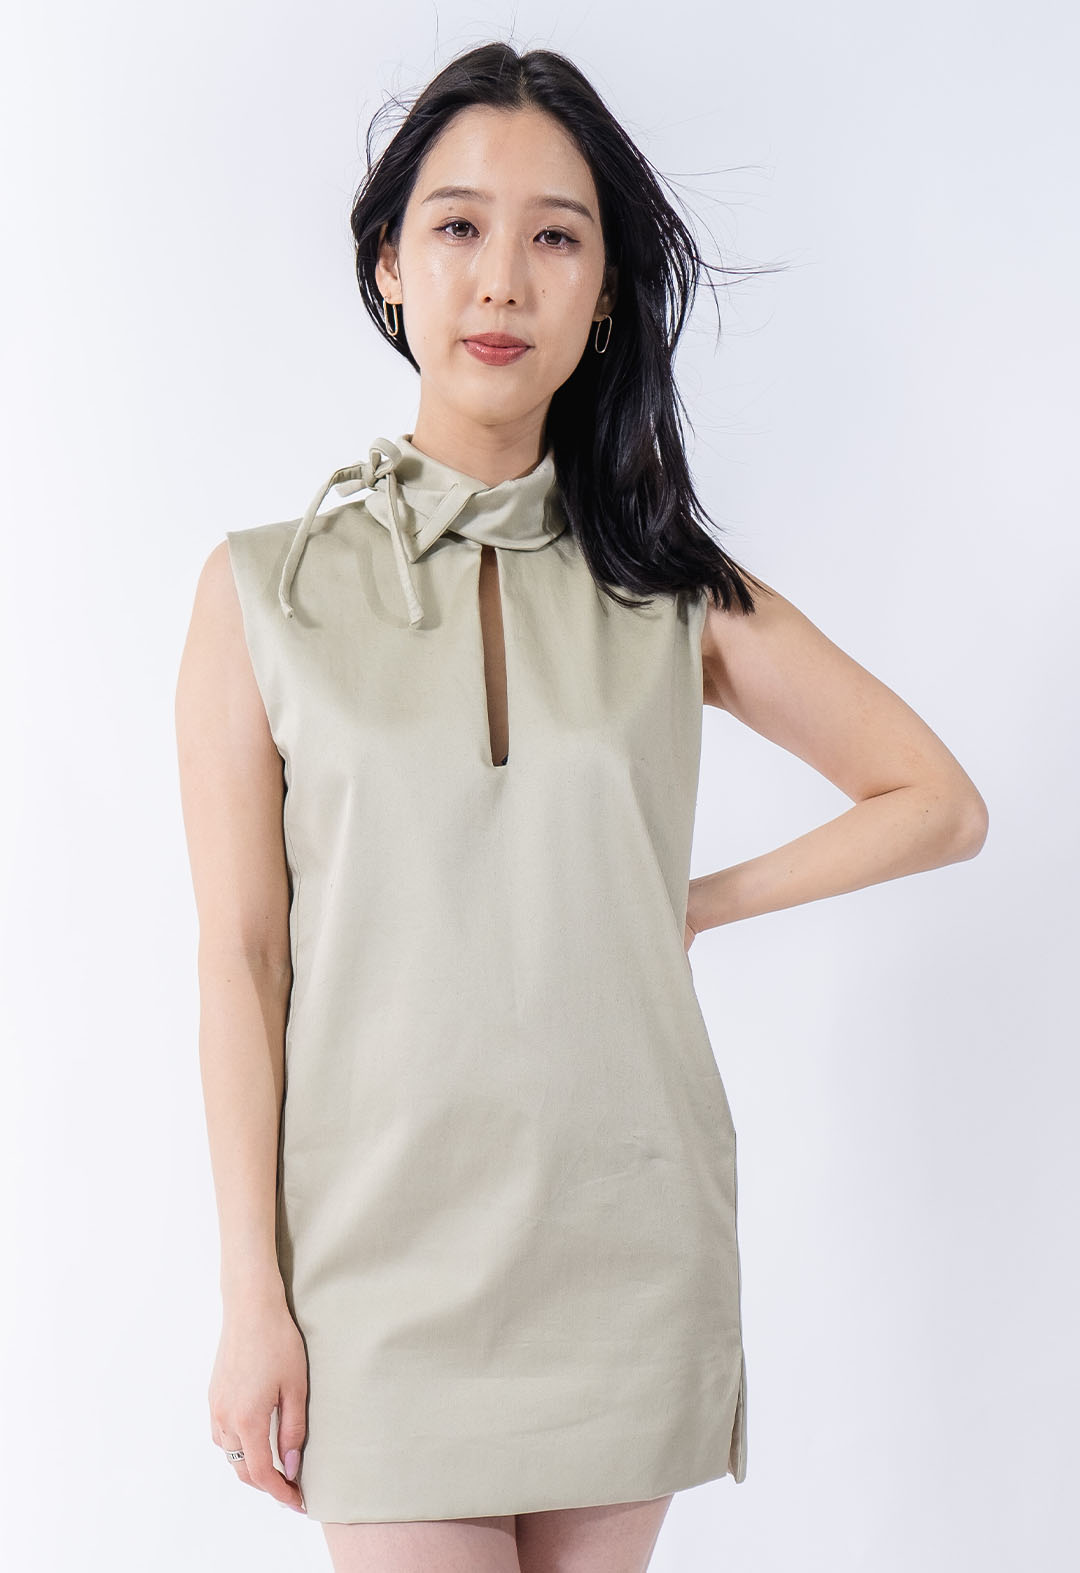 This pale, light-green mini dress has a skinny rectangular cutout from the neck to the bust. There is a stand collar attached to the neckline that pulls through itself via welt openings to tie into a bow at the side of the neck. The model is standing in front of a white background and looking straight into the camera with one hand on her hip.  